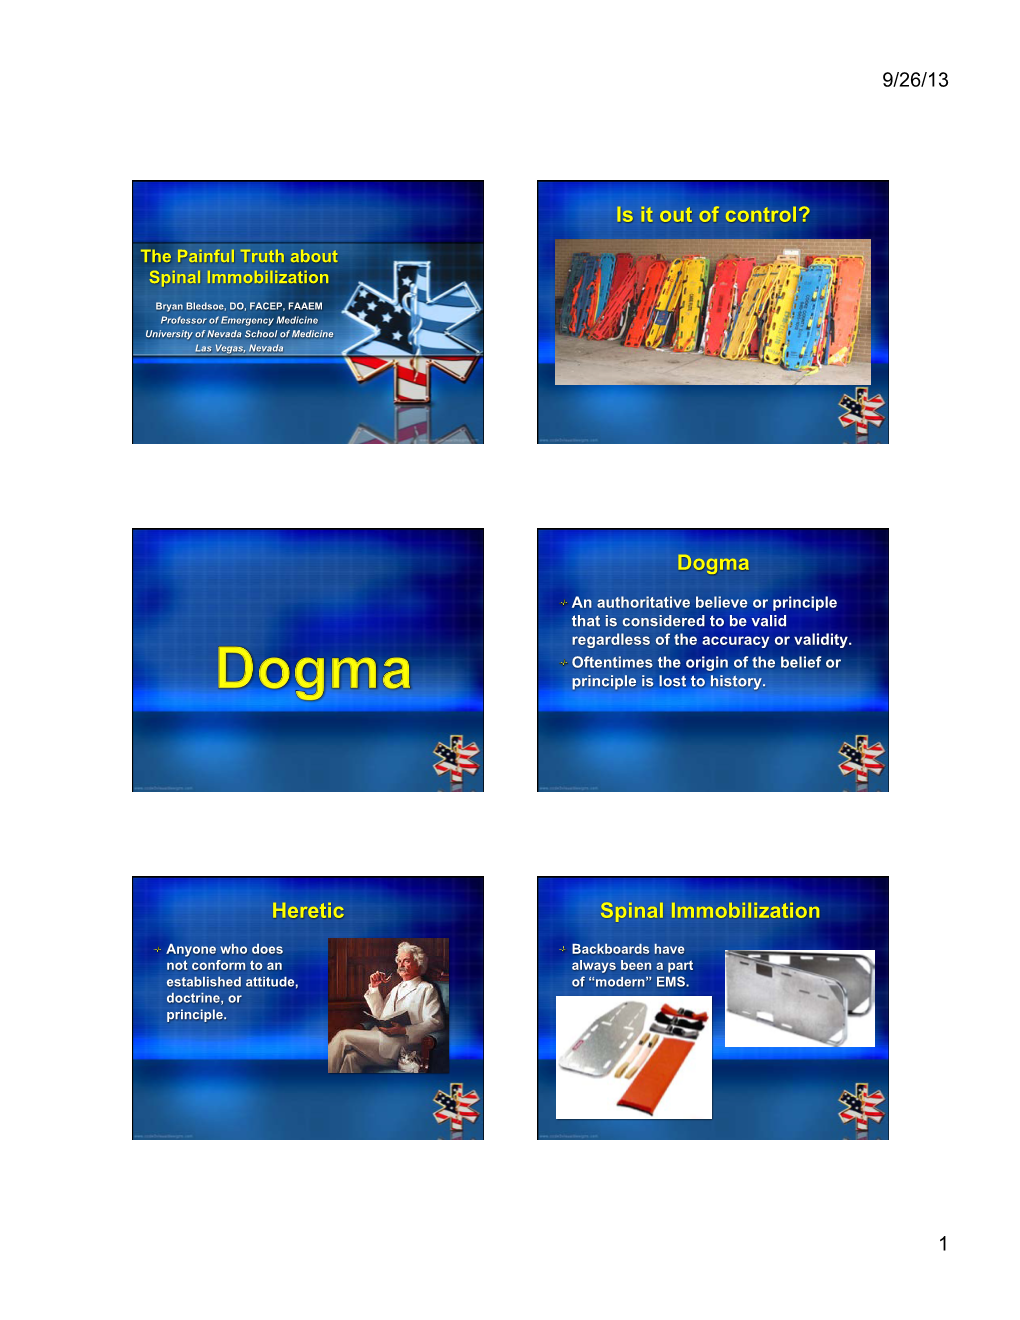 Dogma Heretic Spinal Immobilization